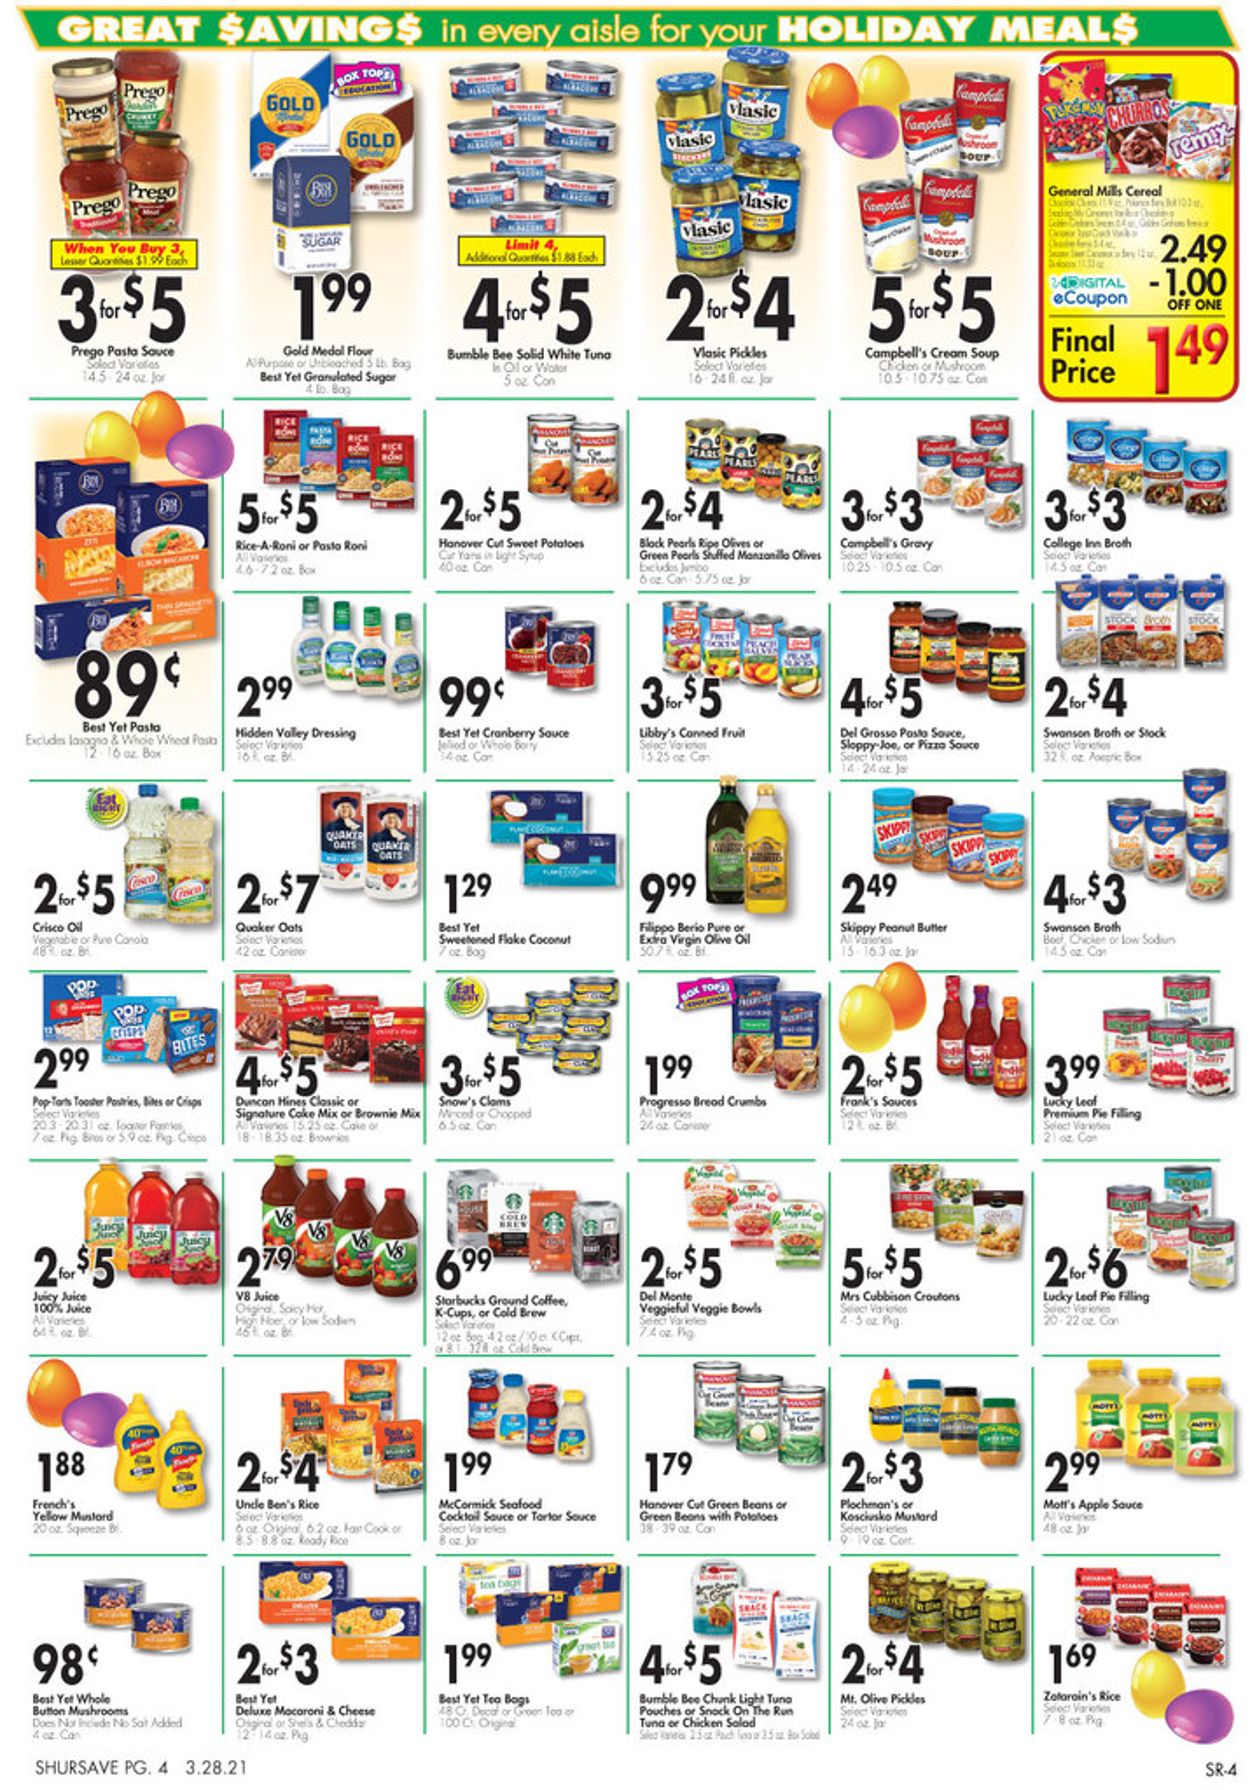 Gerrity's Supermarkets - Easter 2021 ad Weekly Ad Circular - valid 03/28-04/03/2021 (Page 5)